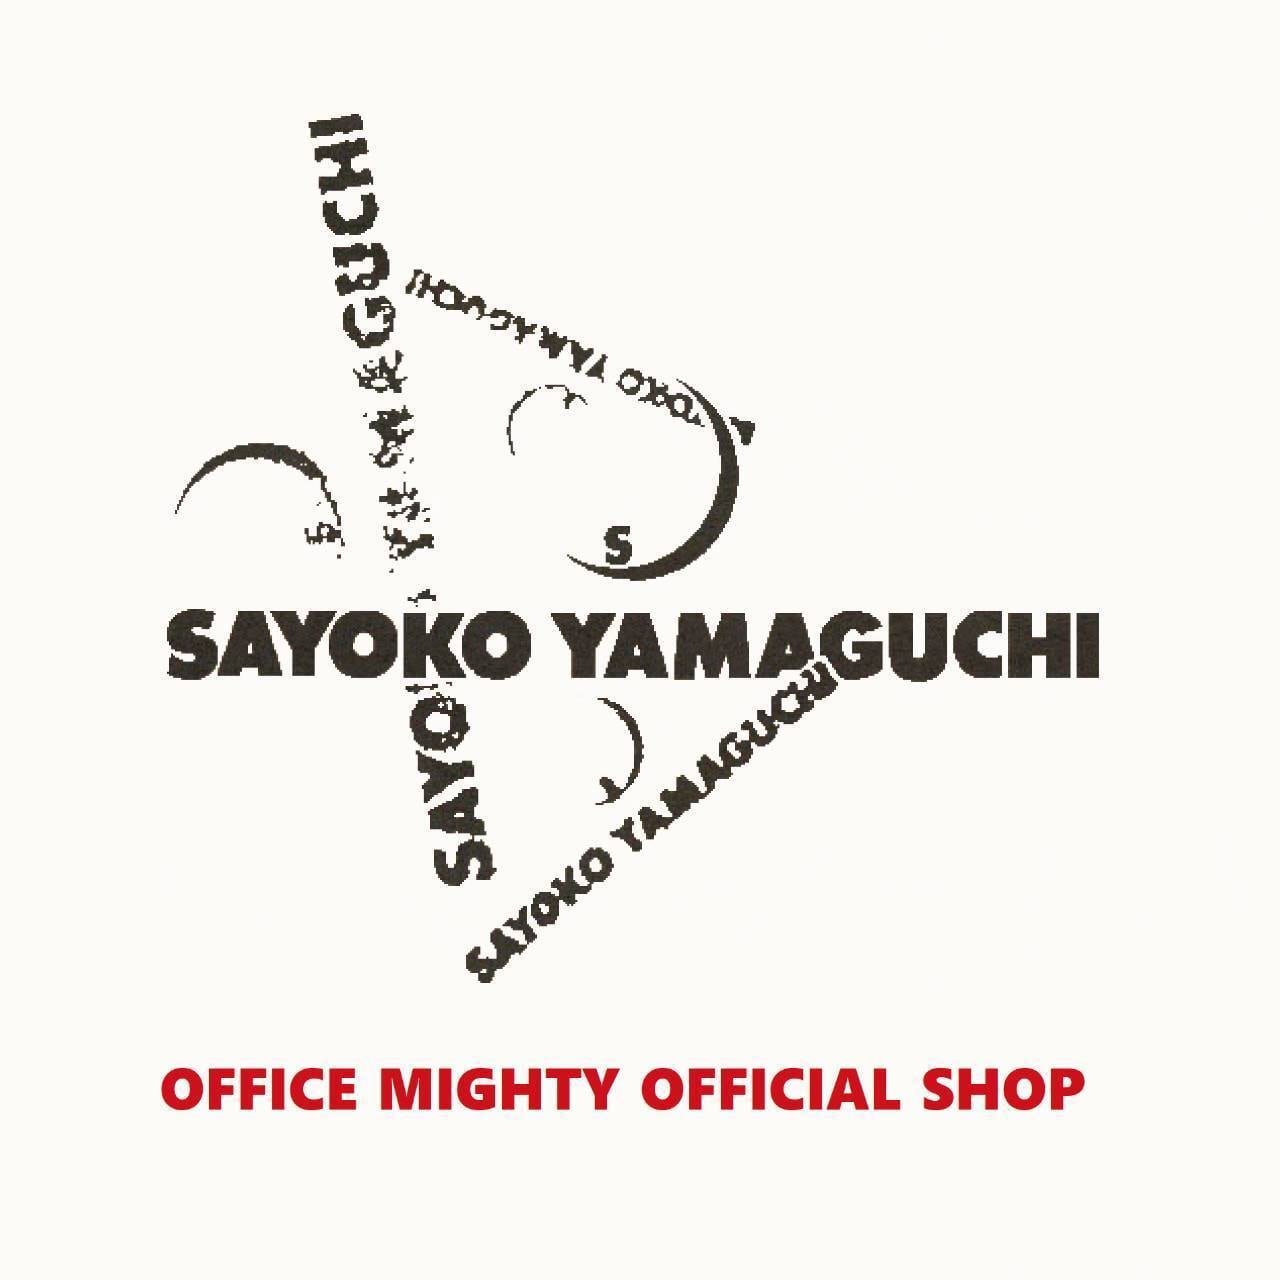 OFFICE MIGHTY OFFICIAL SHOP